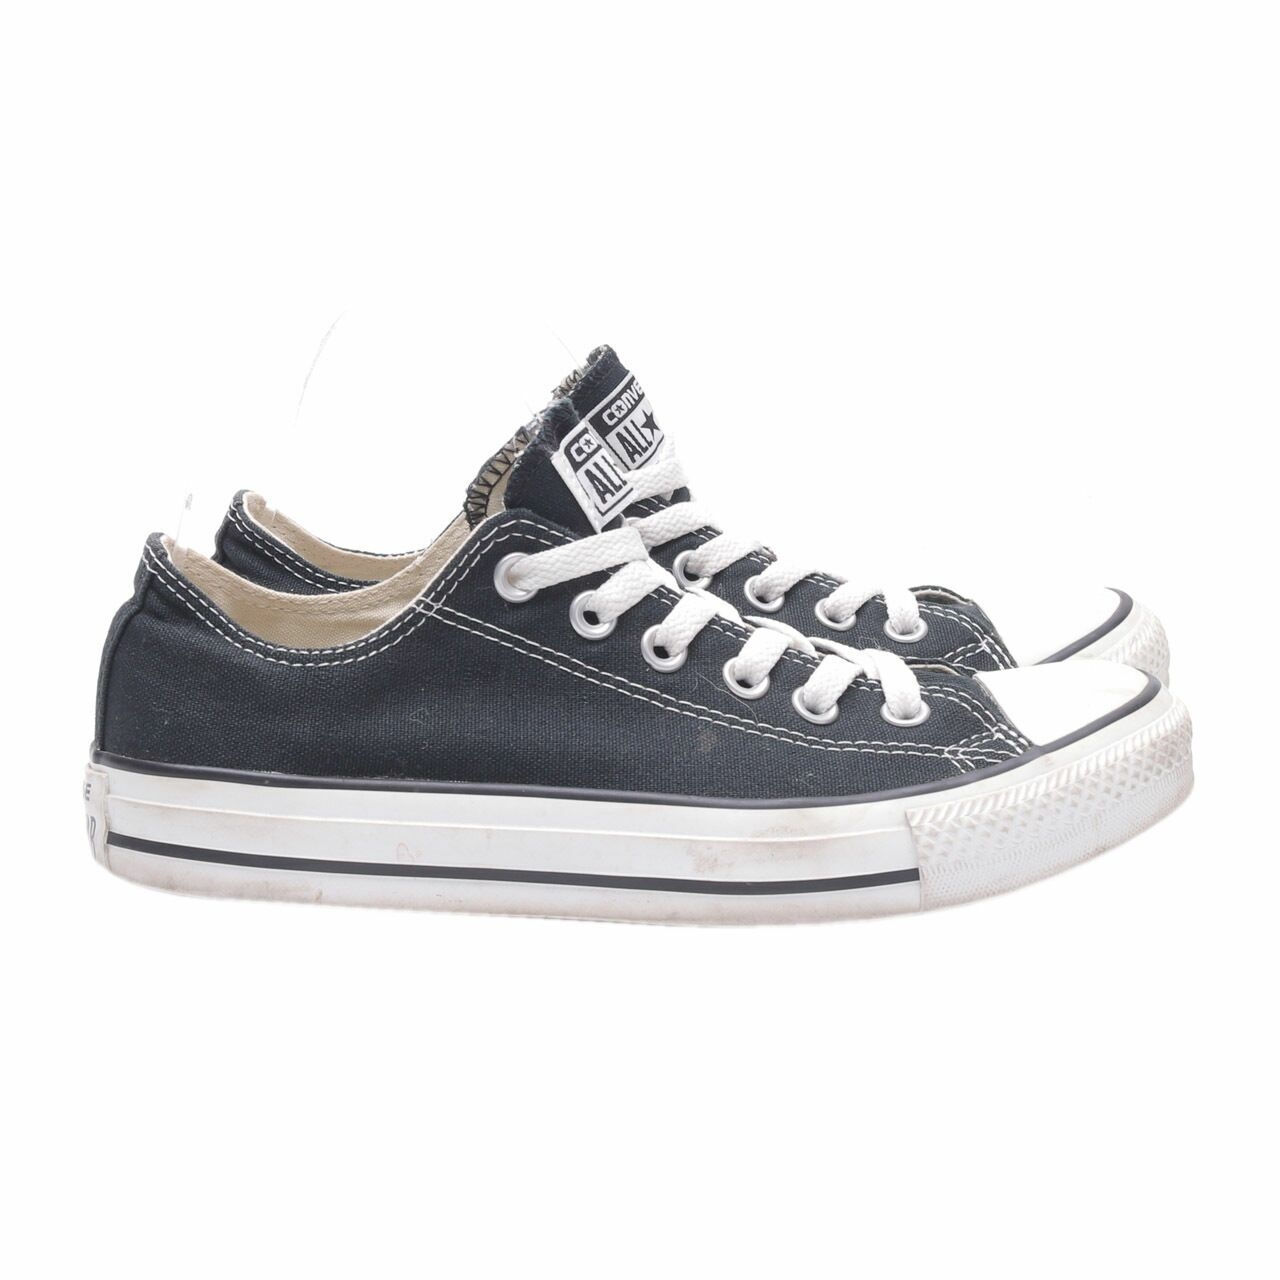 Converse All Star Black Sneakers